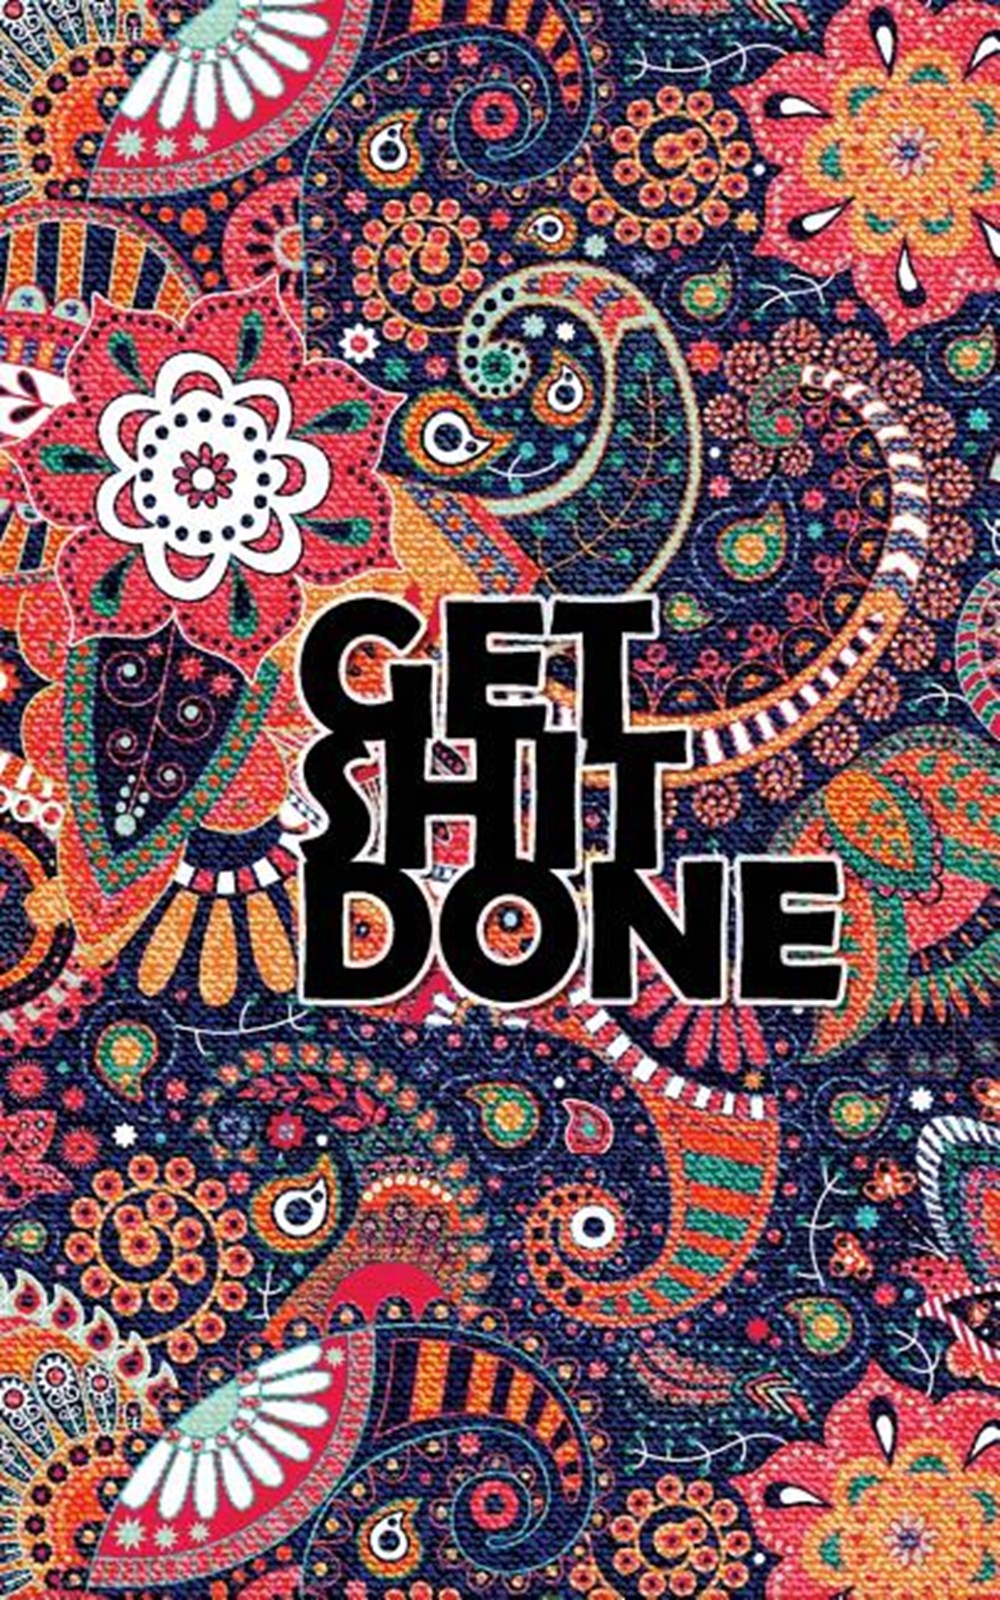 Get Shit Done 2019 Weekly Planner Tuned to Tone - Workout or Business - Keep Up the Hustle!